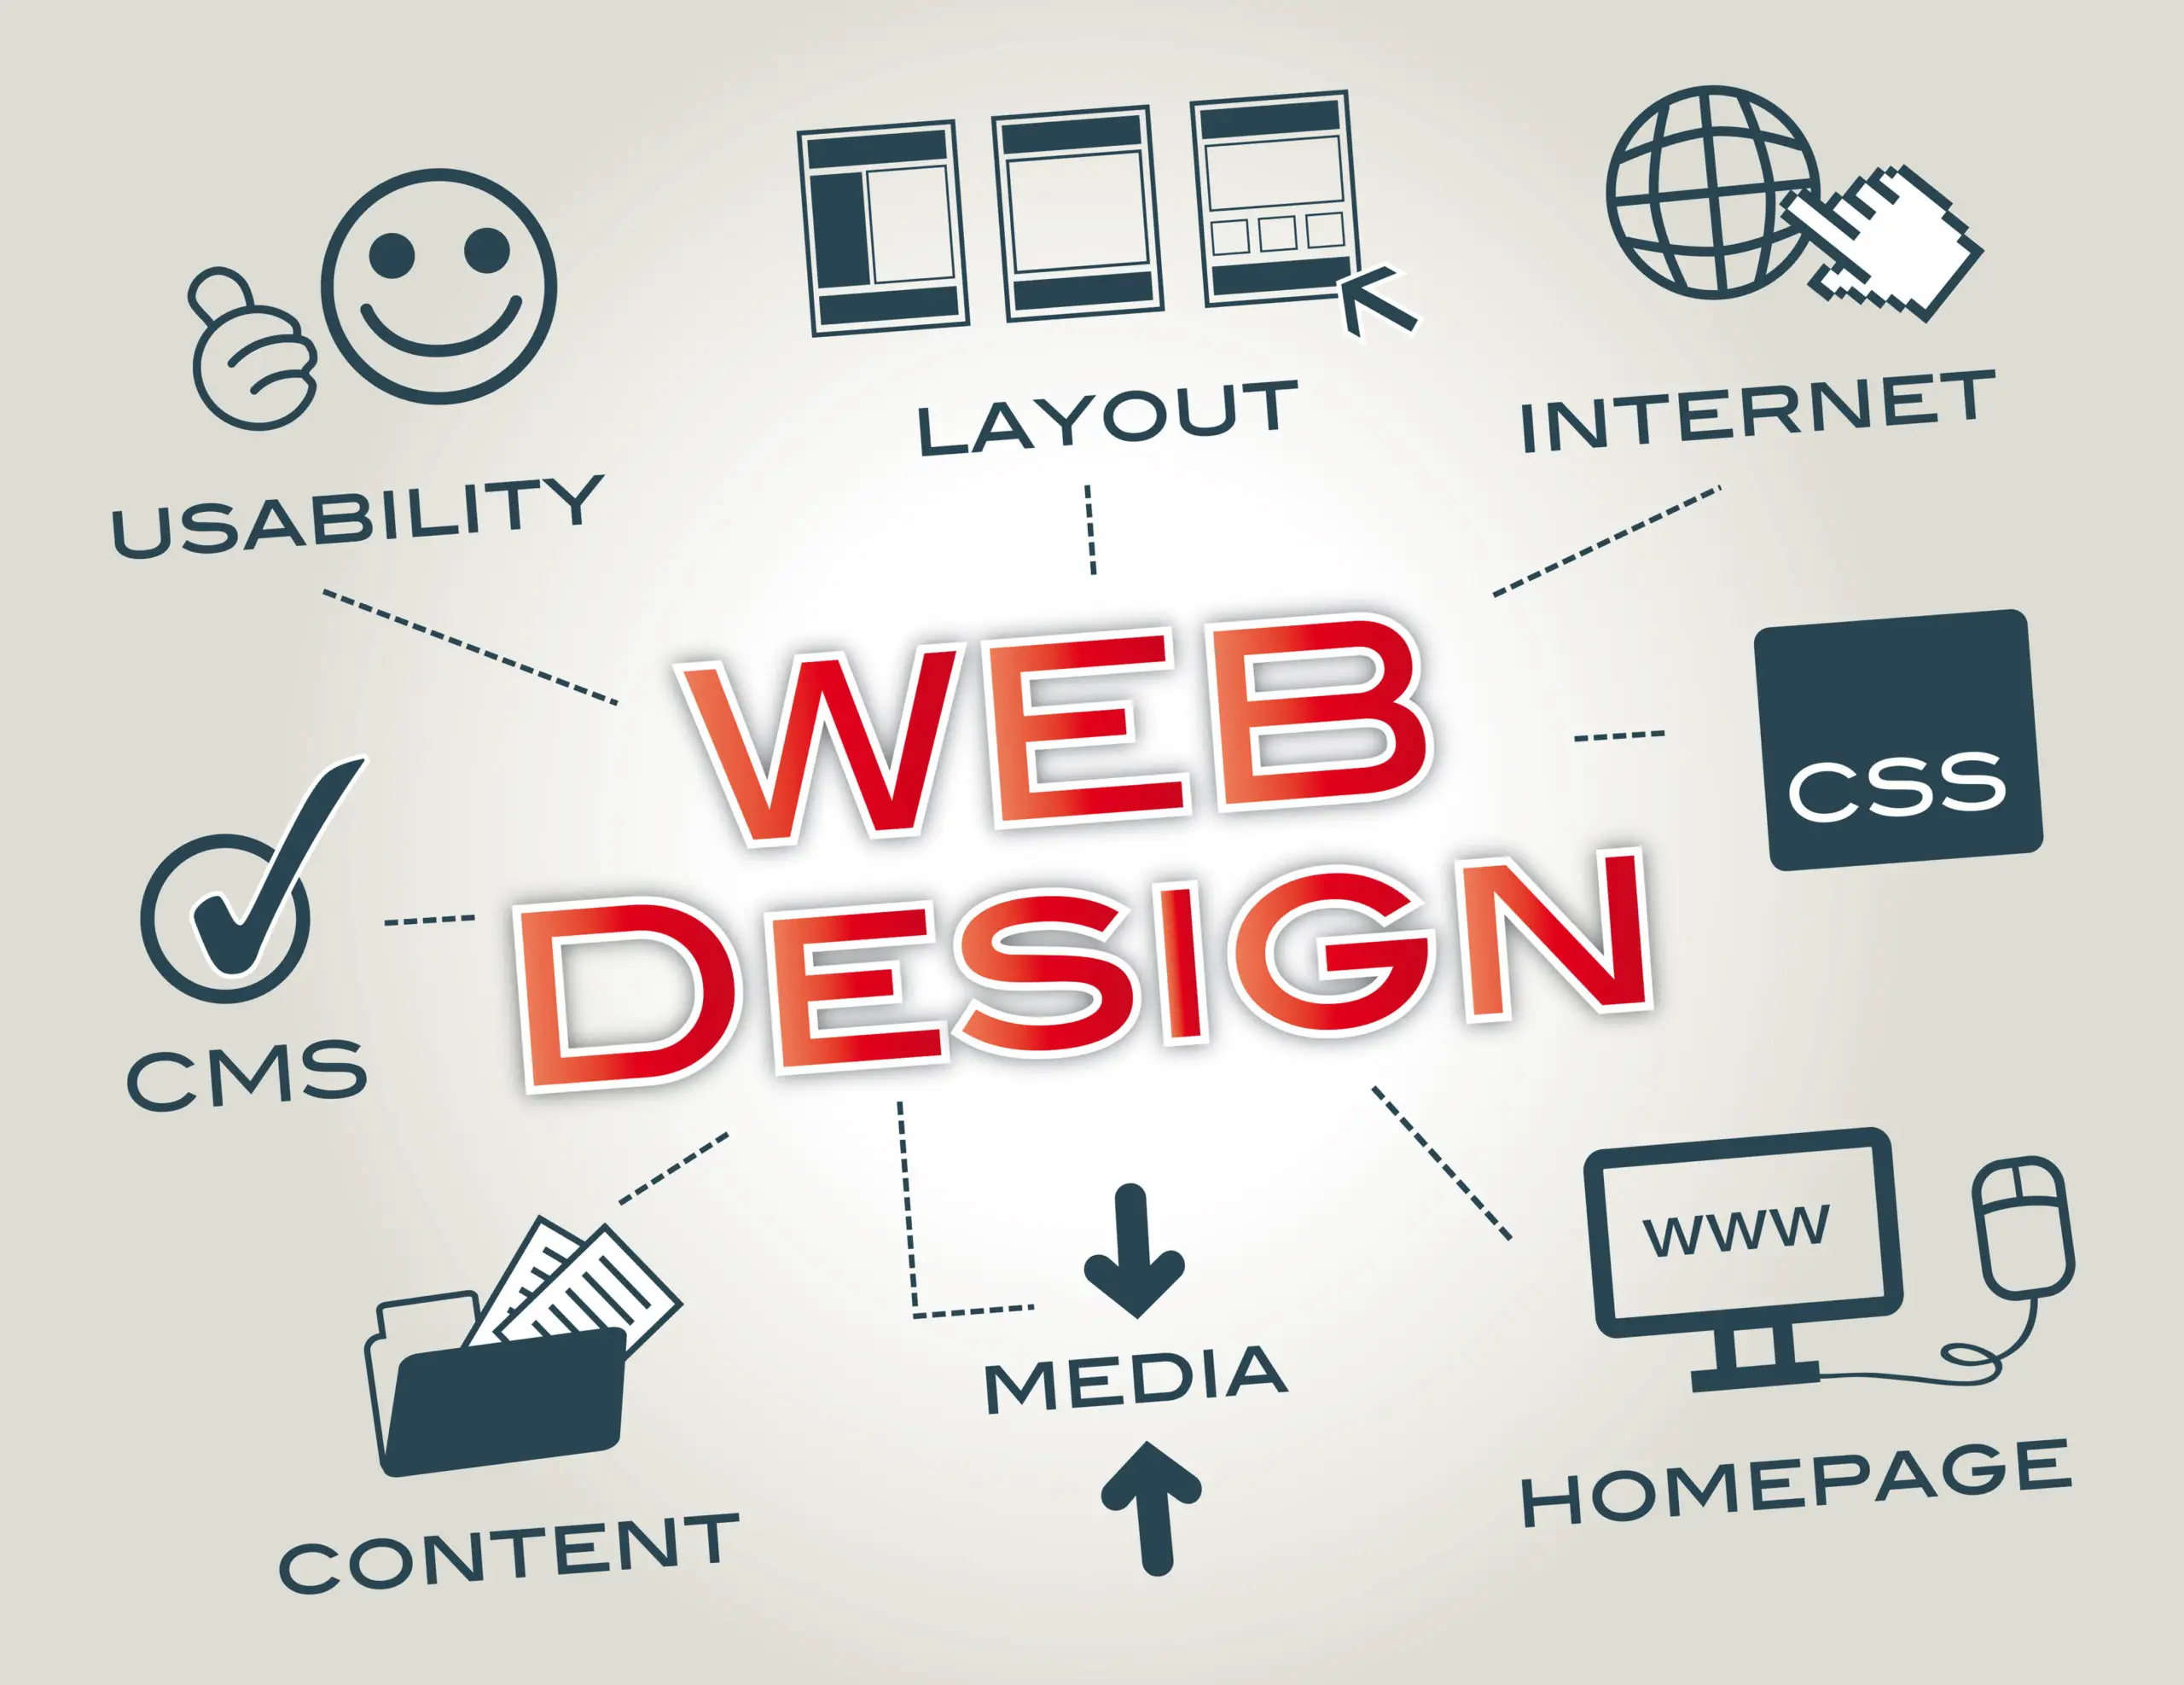 Website Design Trends You May Want to Avoid